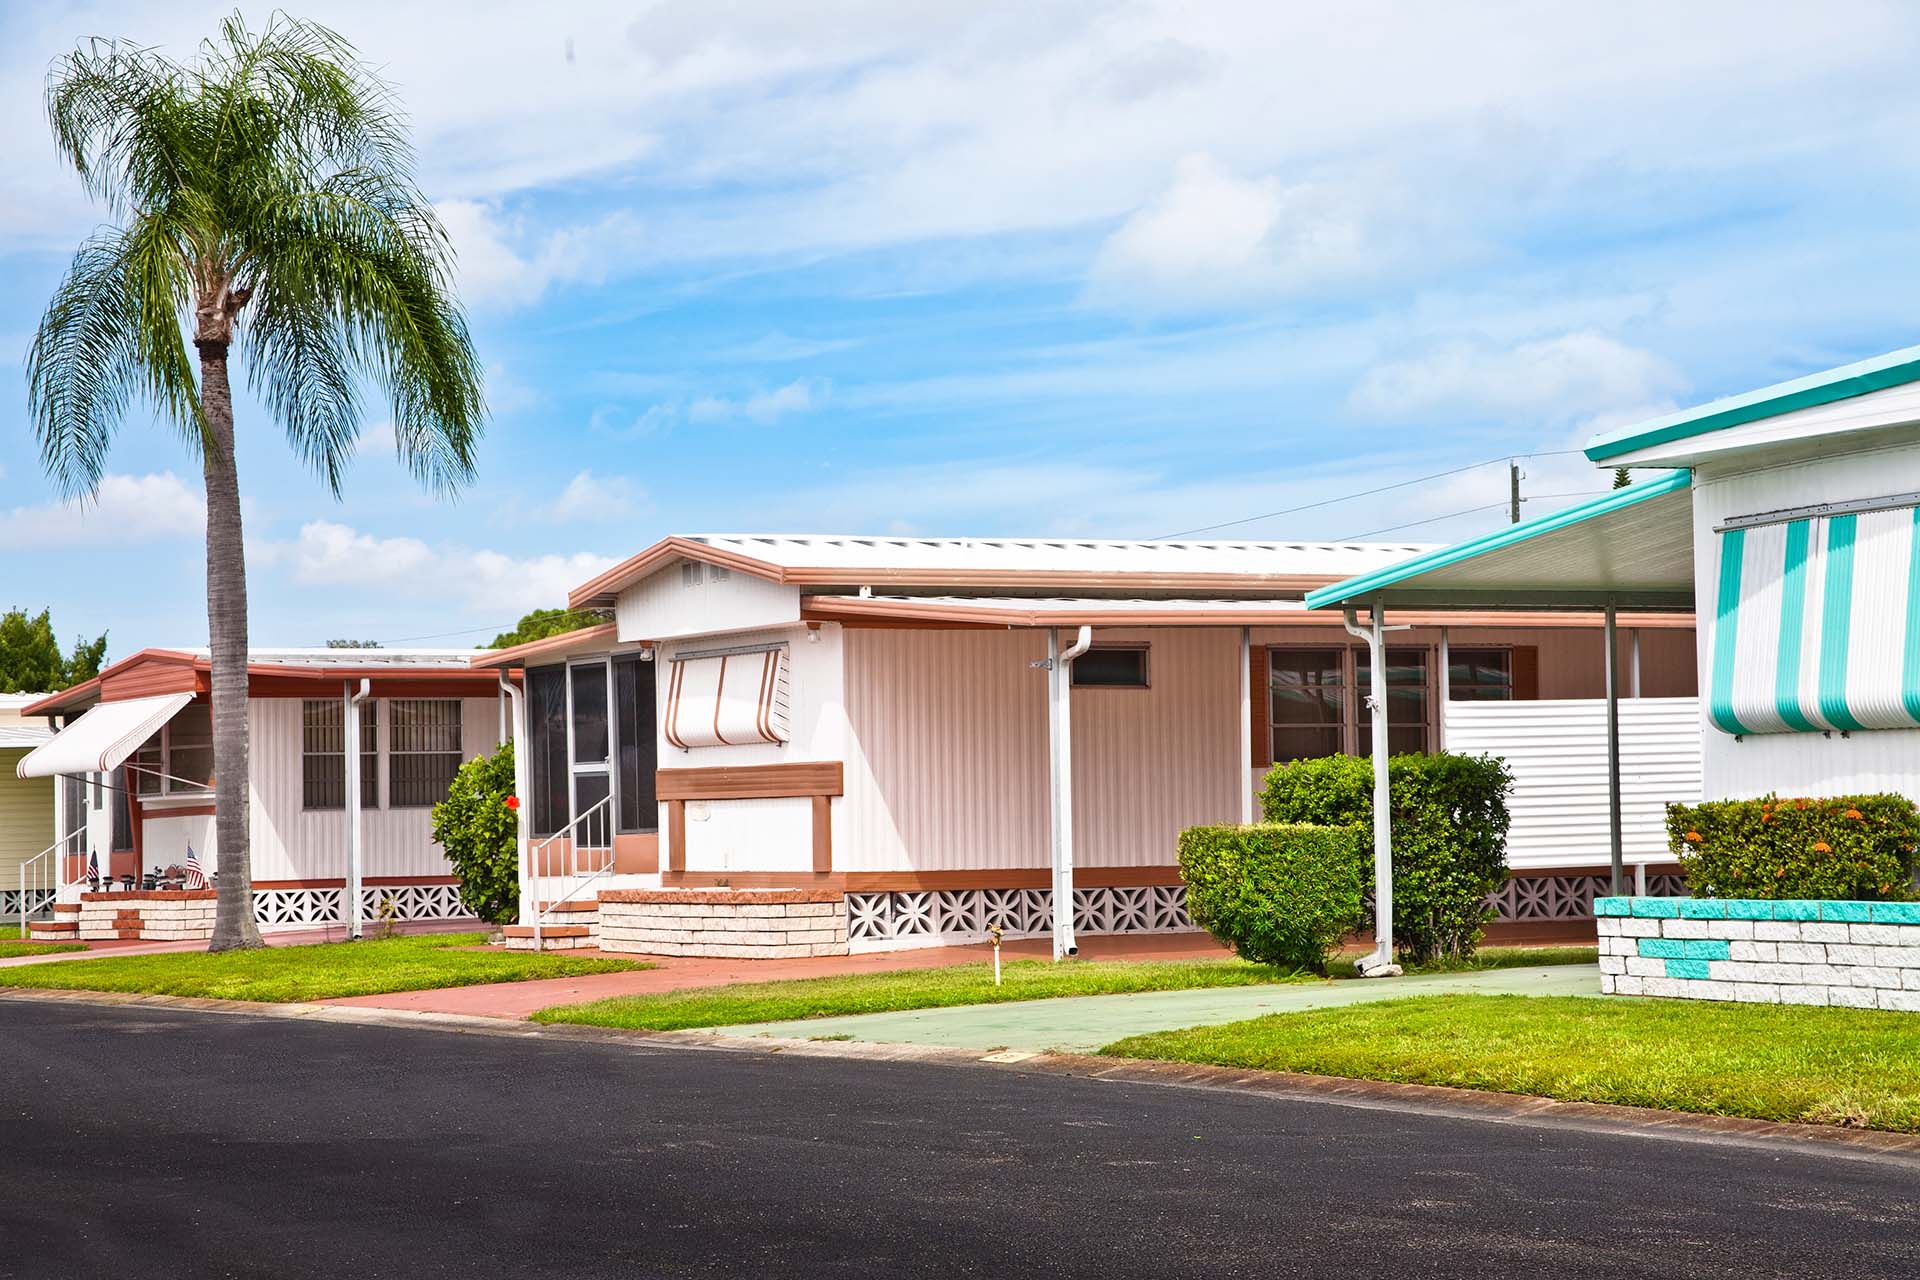 A History of Manufactured Homes